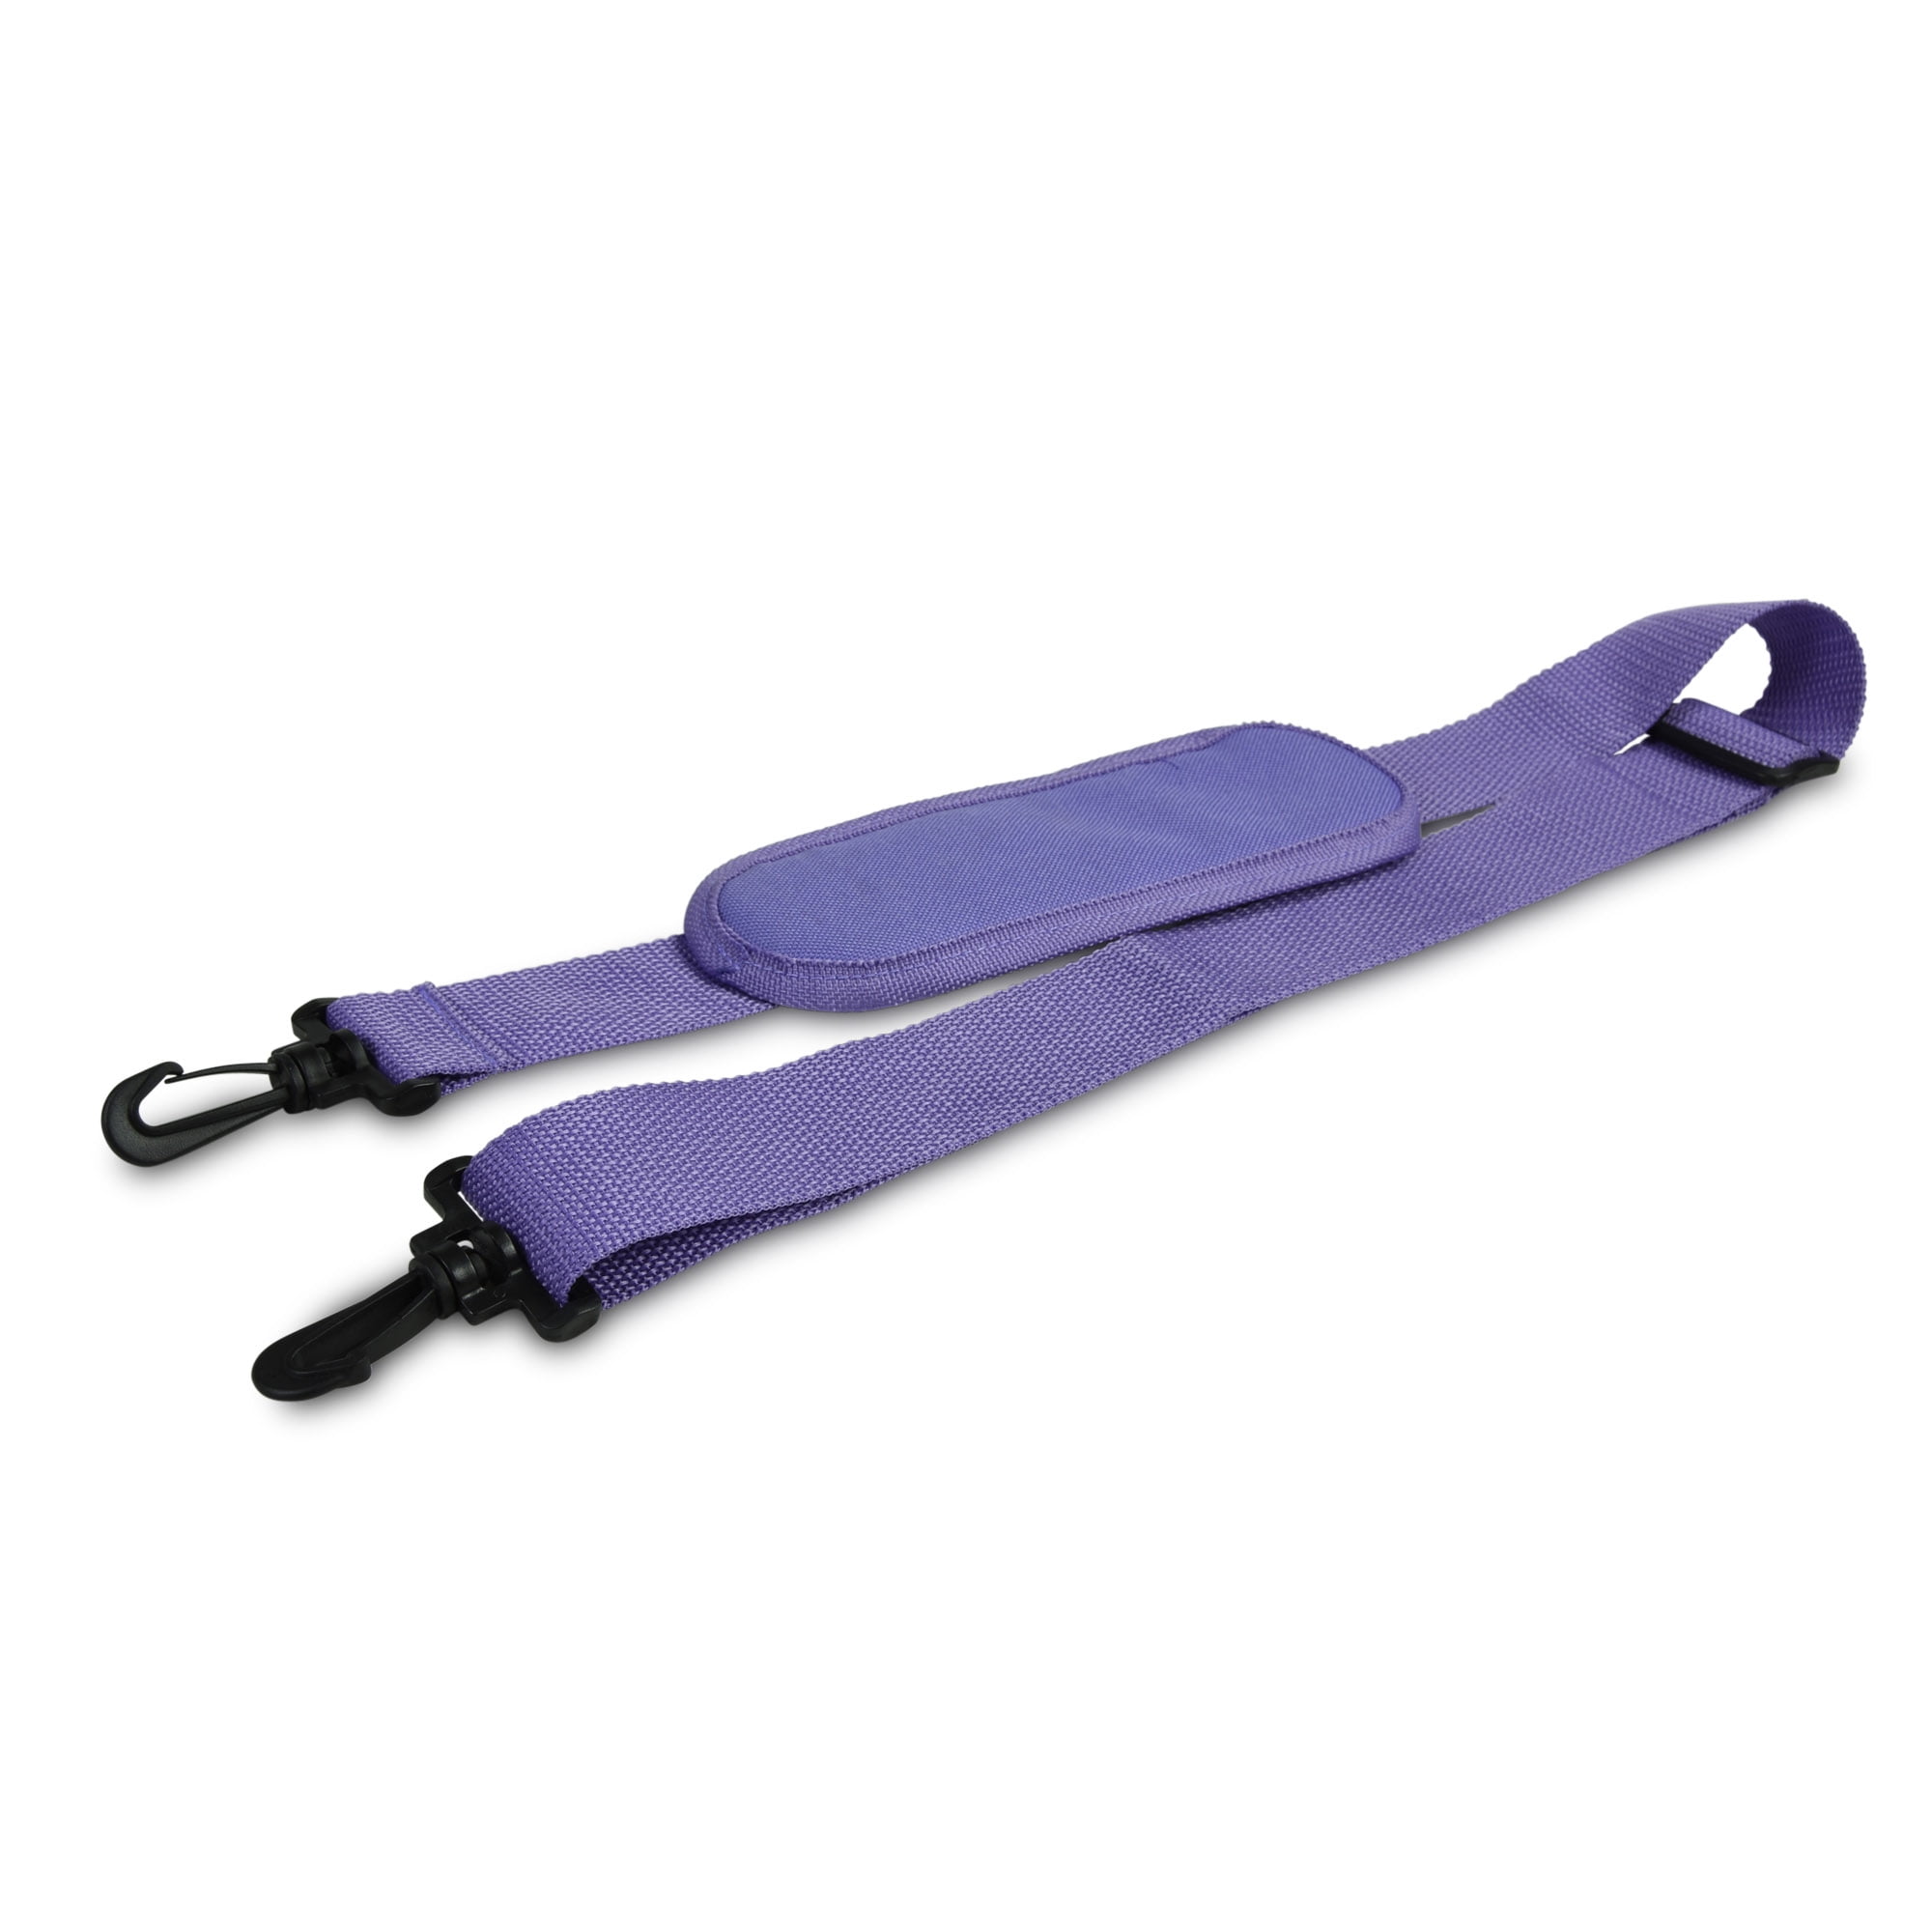 DALIX Premium Replacement Strap With Pad Laptop Travel Duffle Bag In Purple - www.bagssaleusa.com ...